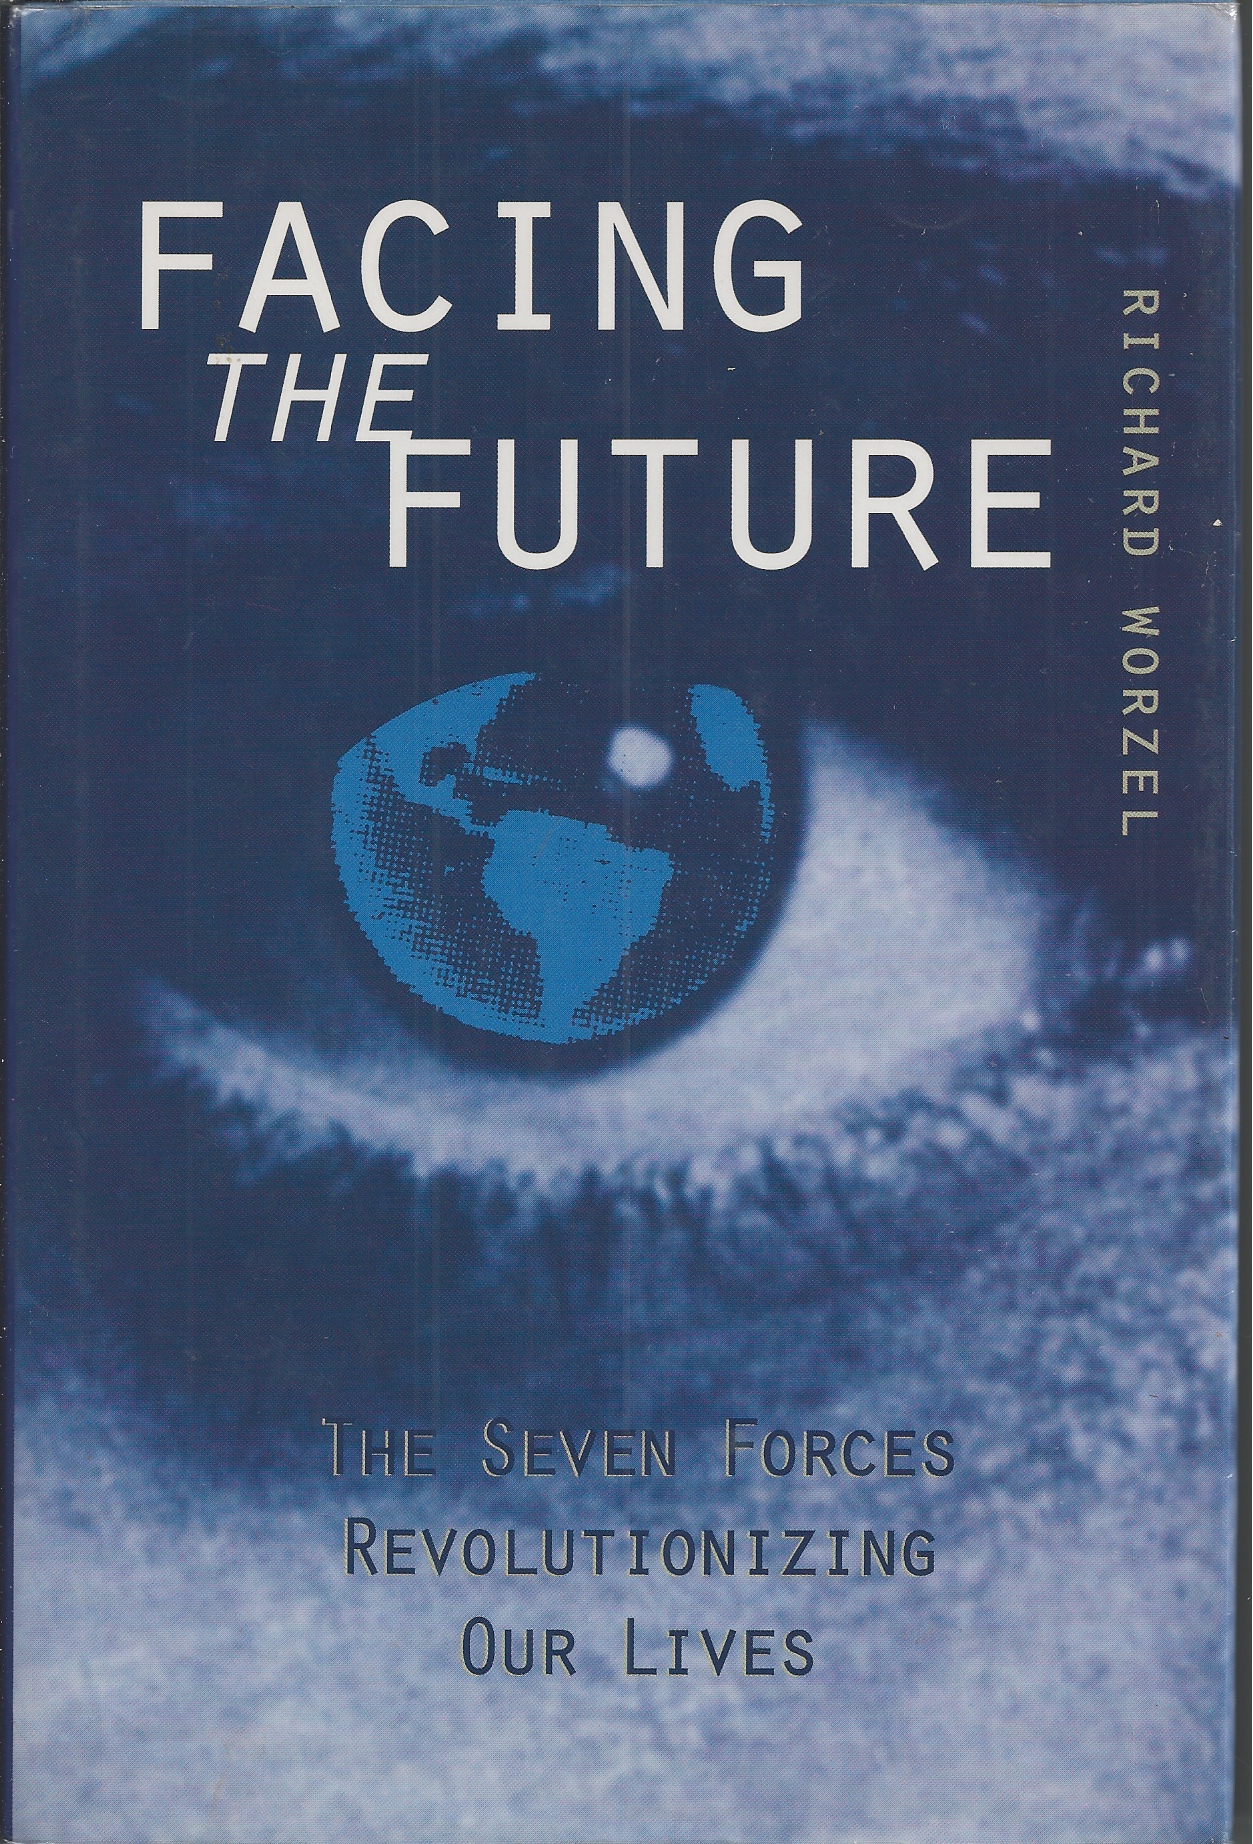 WORZEL, RICHARD. - Facing the Future the Seven Forces Revolutionizing Our Lives.